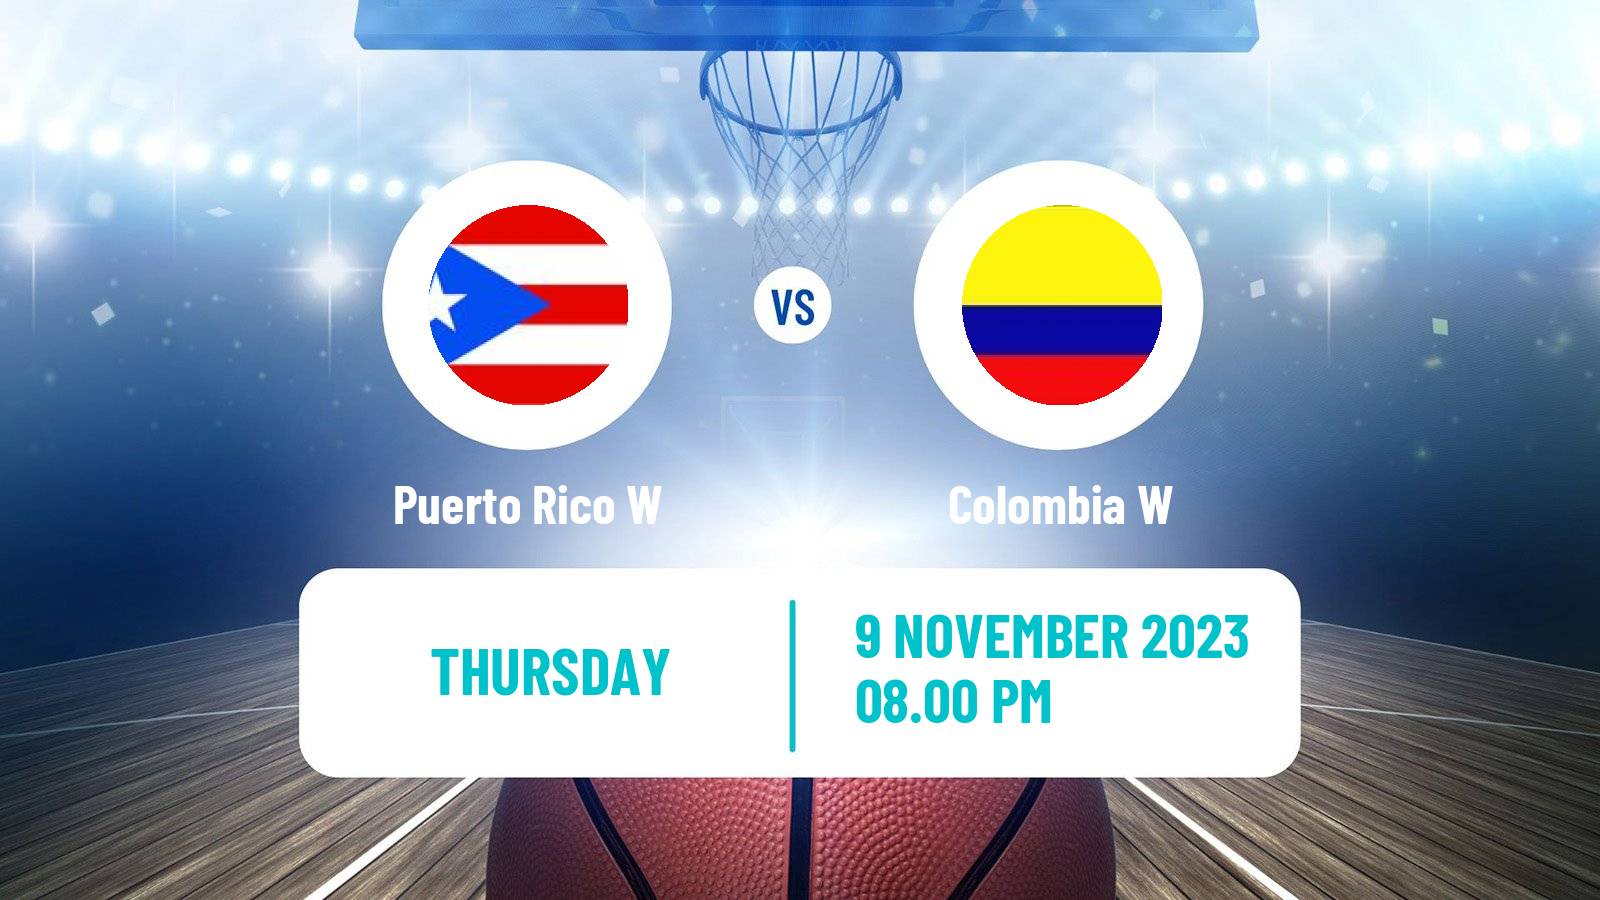 Basketball Olympic Games - Basketball Women Puerto Rico W - Colombia W